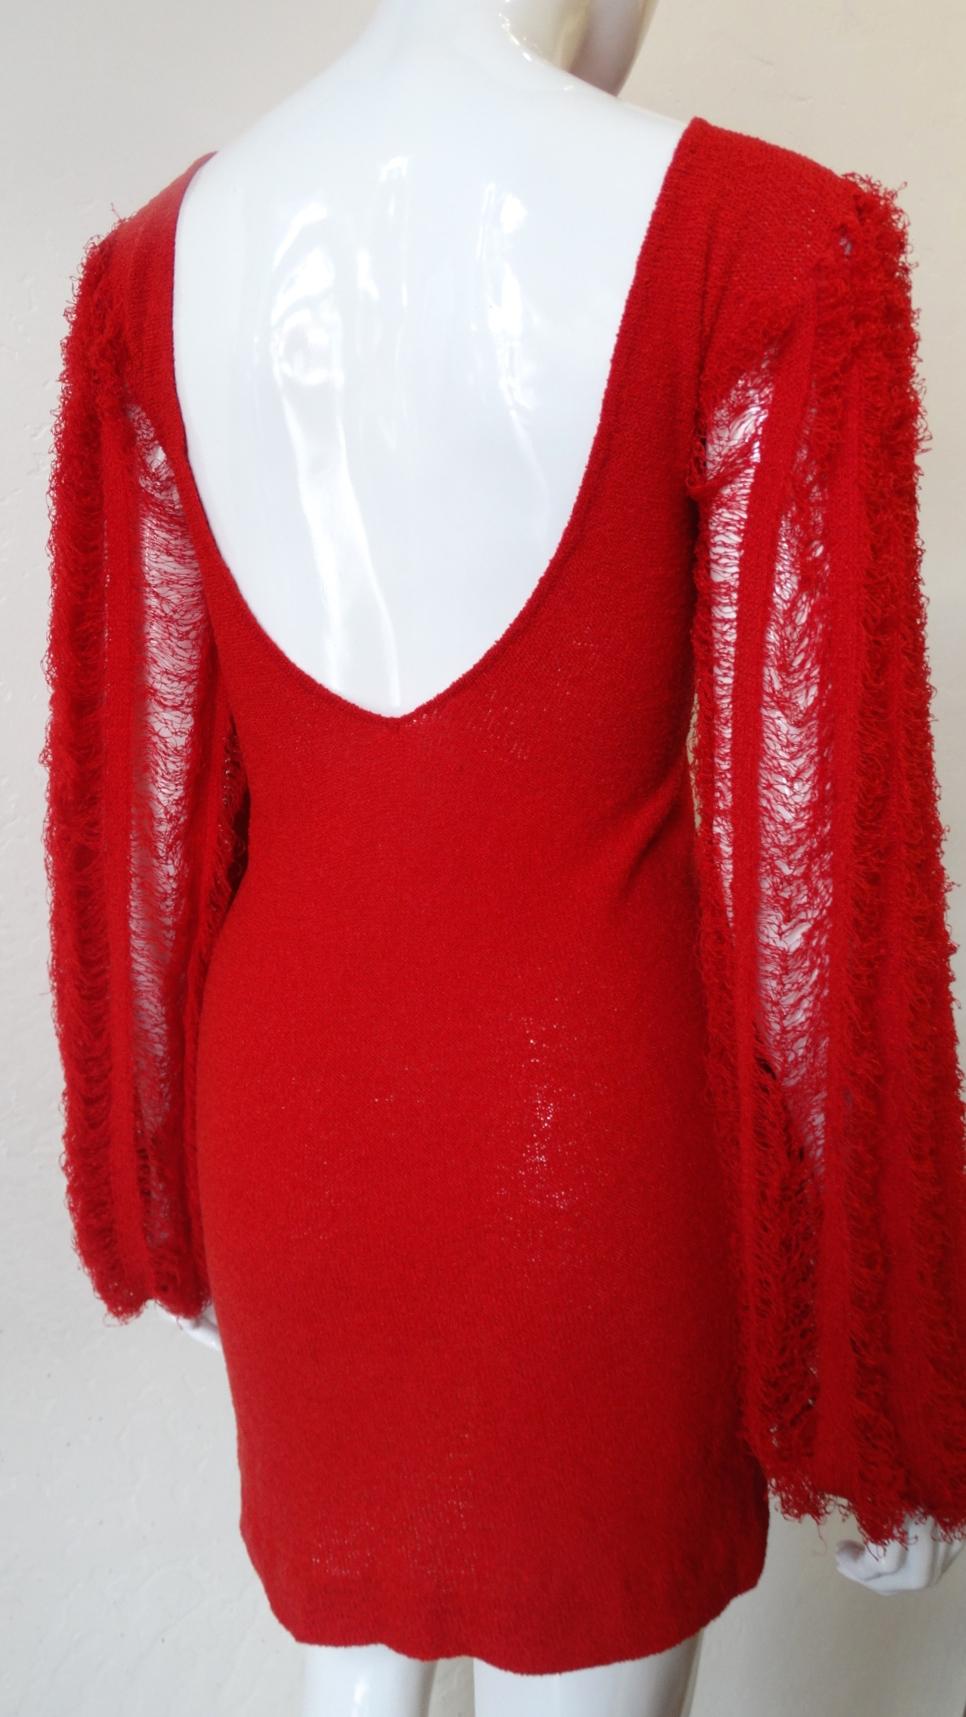 Women's 1980s Red Knit Mini Dress With Dramatic Sleeves